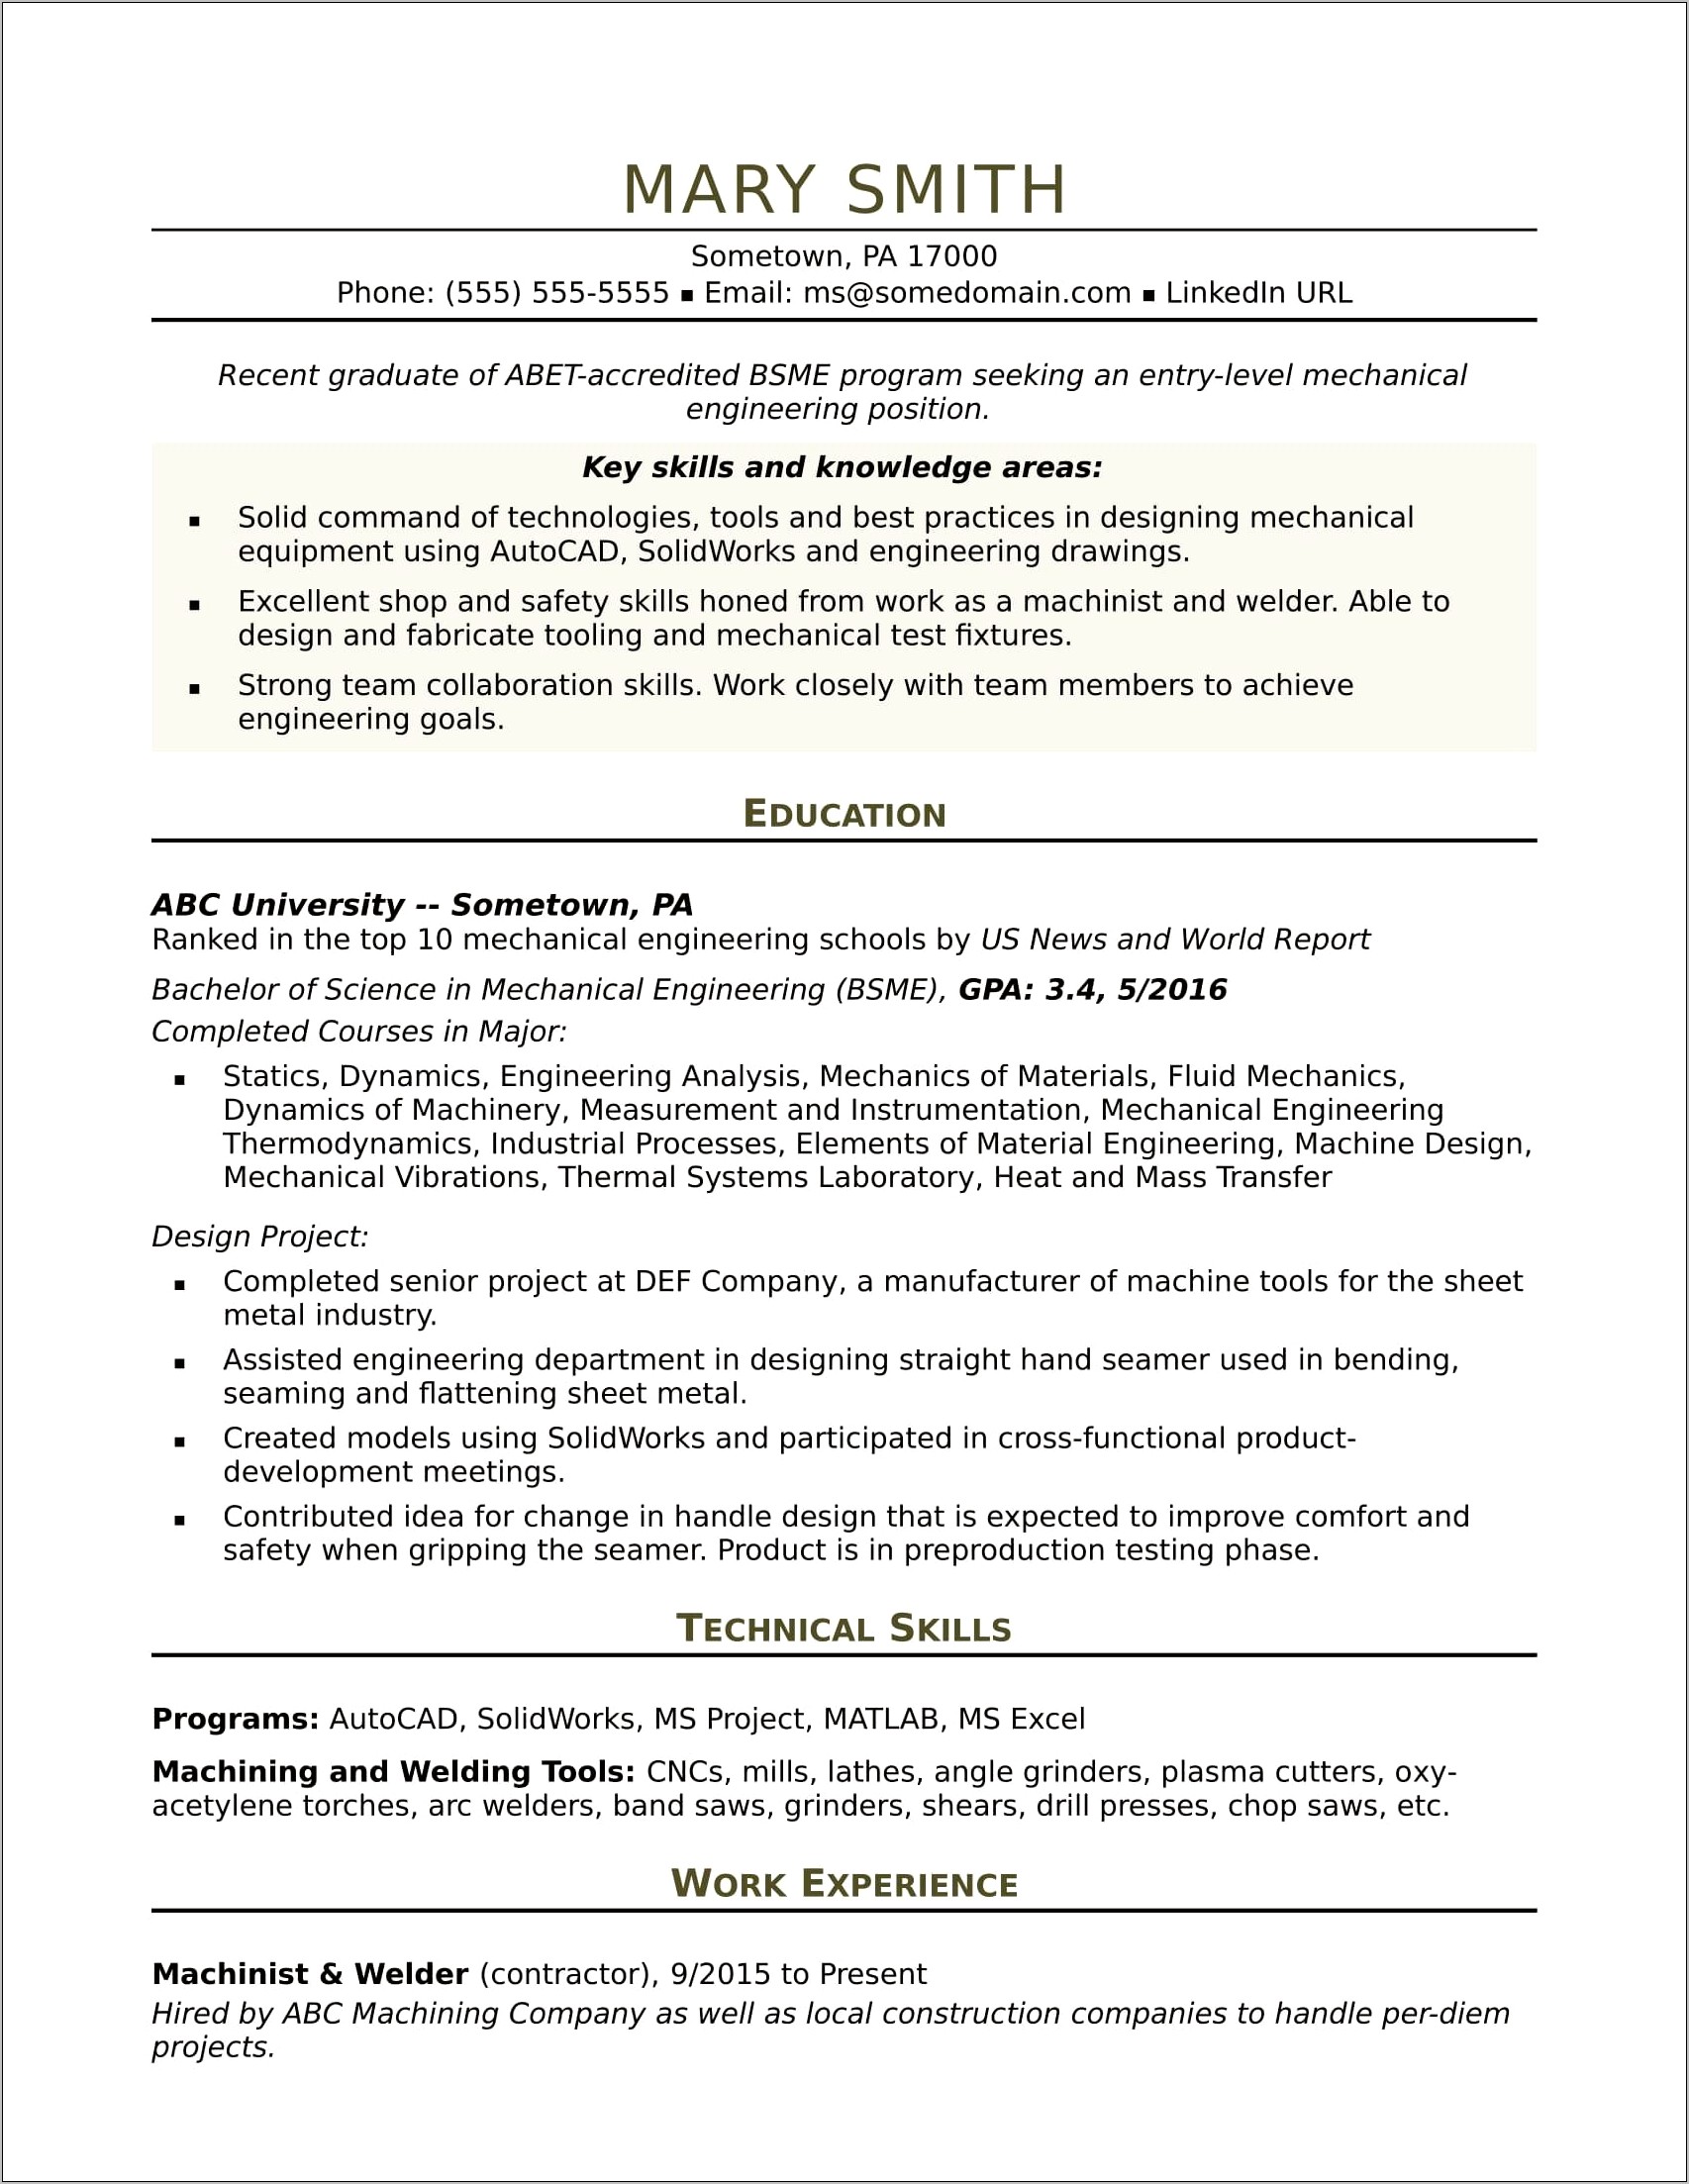 Resume Objectives For Engineering Technician Position